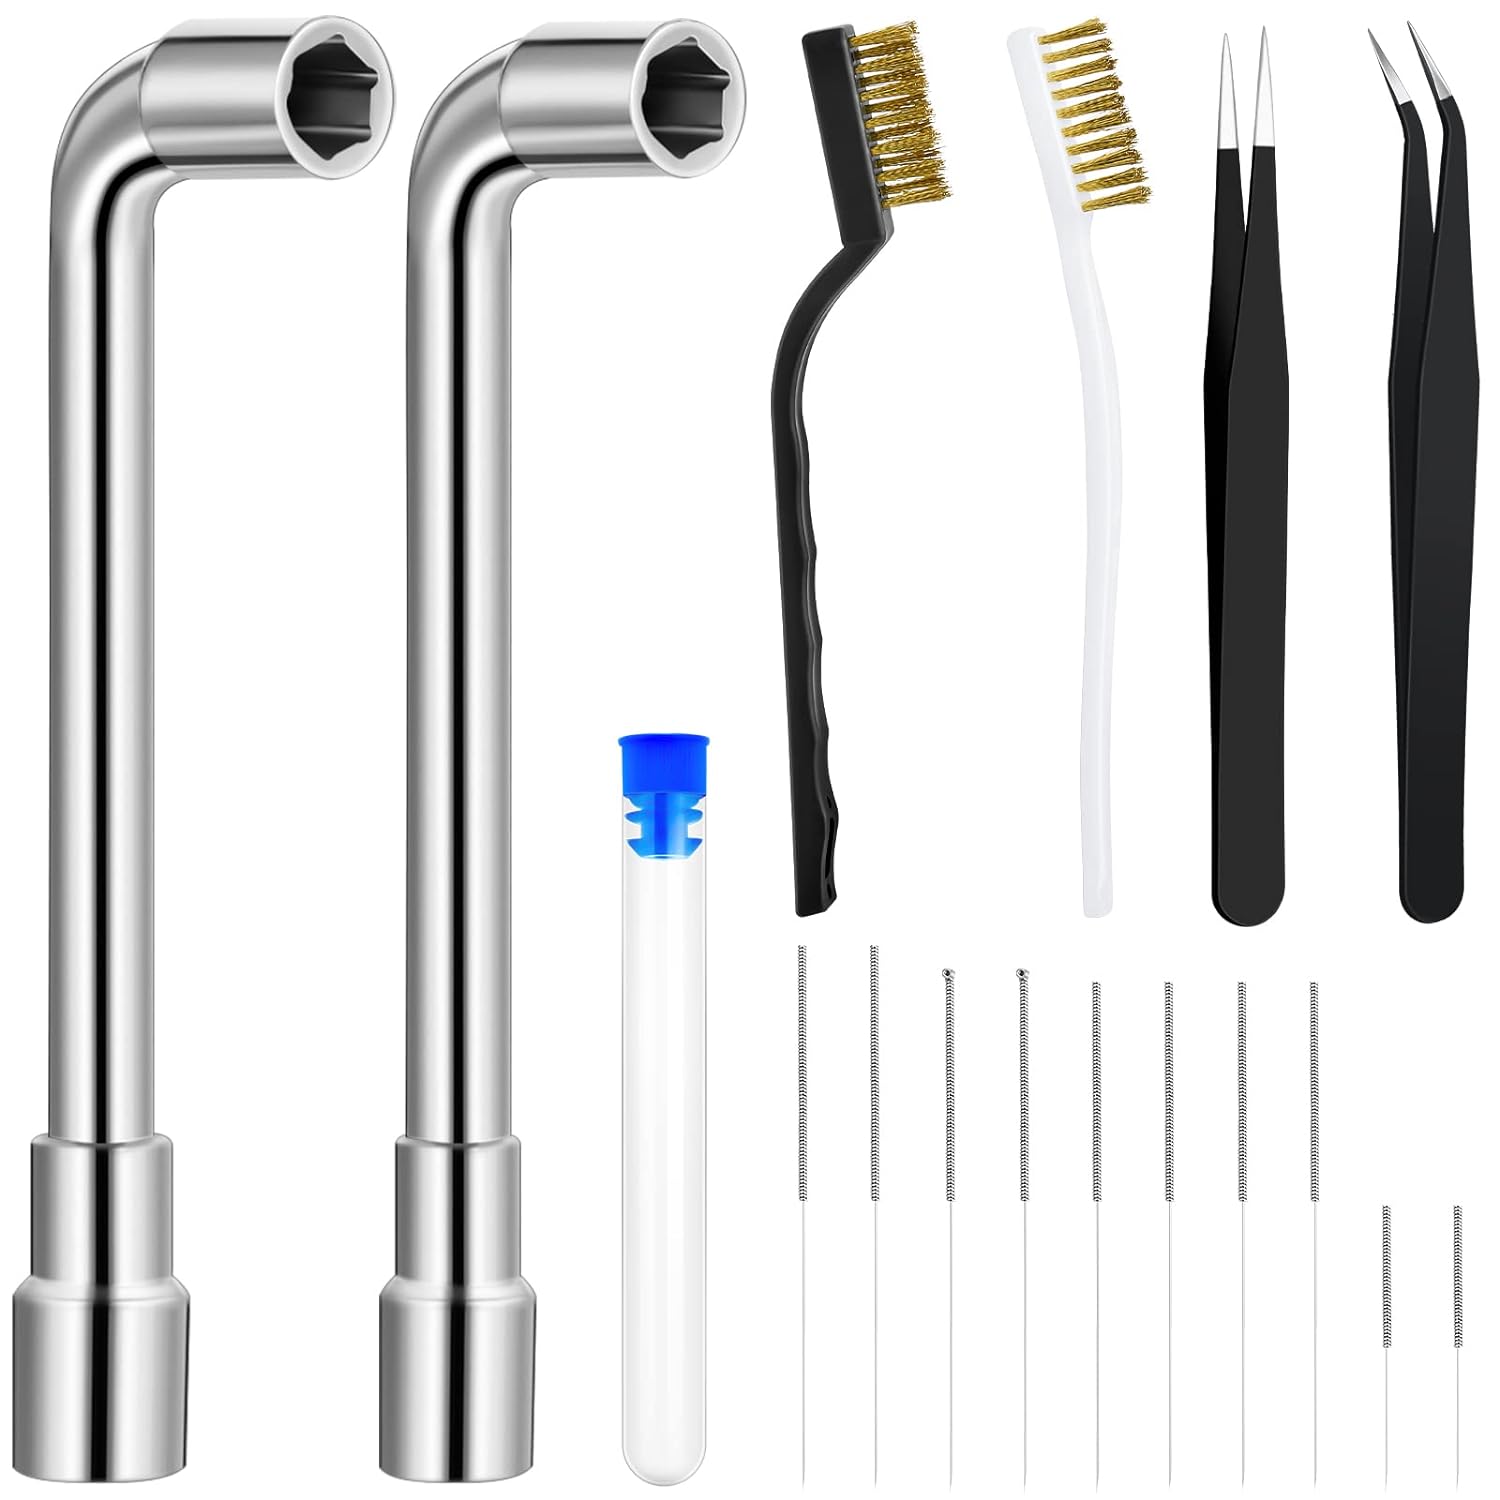 16-pieces-3d-printer-nozzle-wrench-cleaning-kit10-nozzle-cleaning-pins-with-storage-box-2-tweezers-2-cleaning-copper-wir 16 Pieces 3D Printer Nozzle Cleaning Kit Review